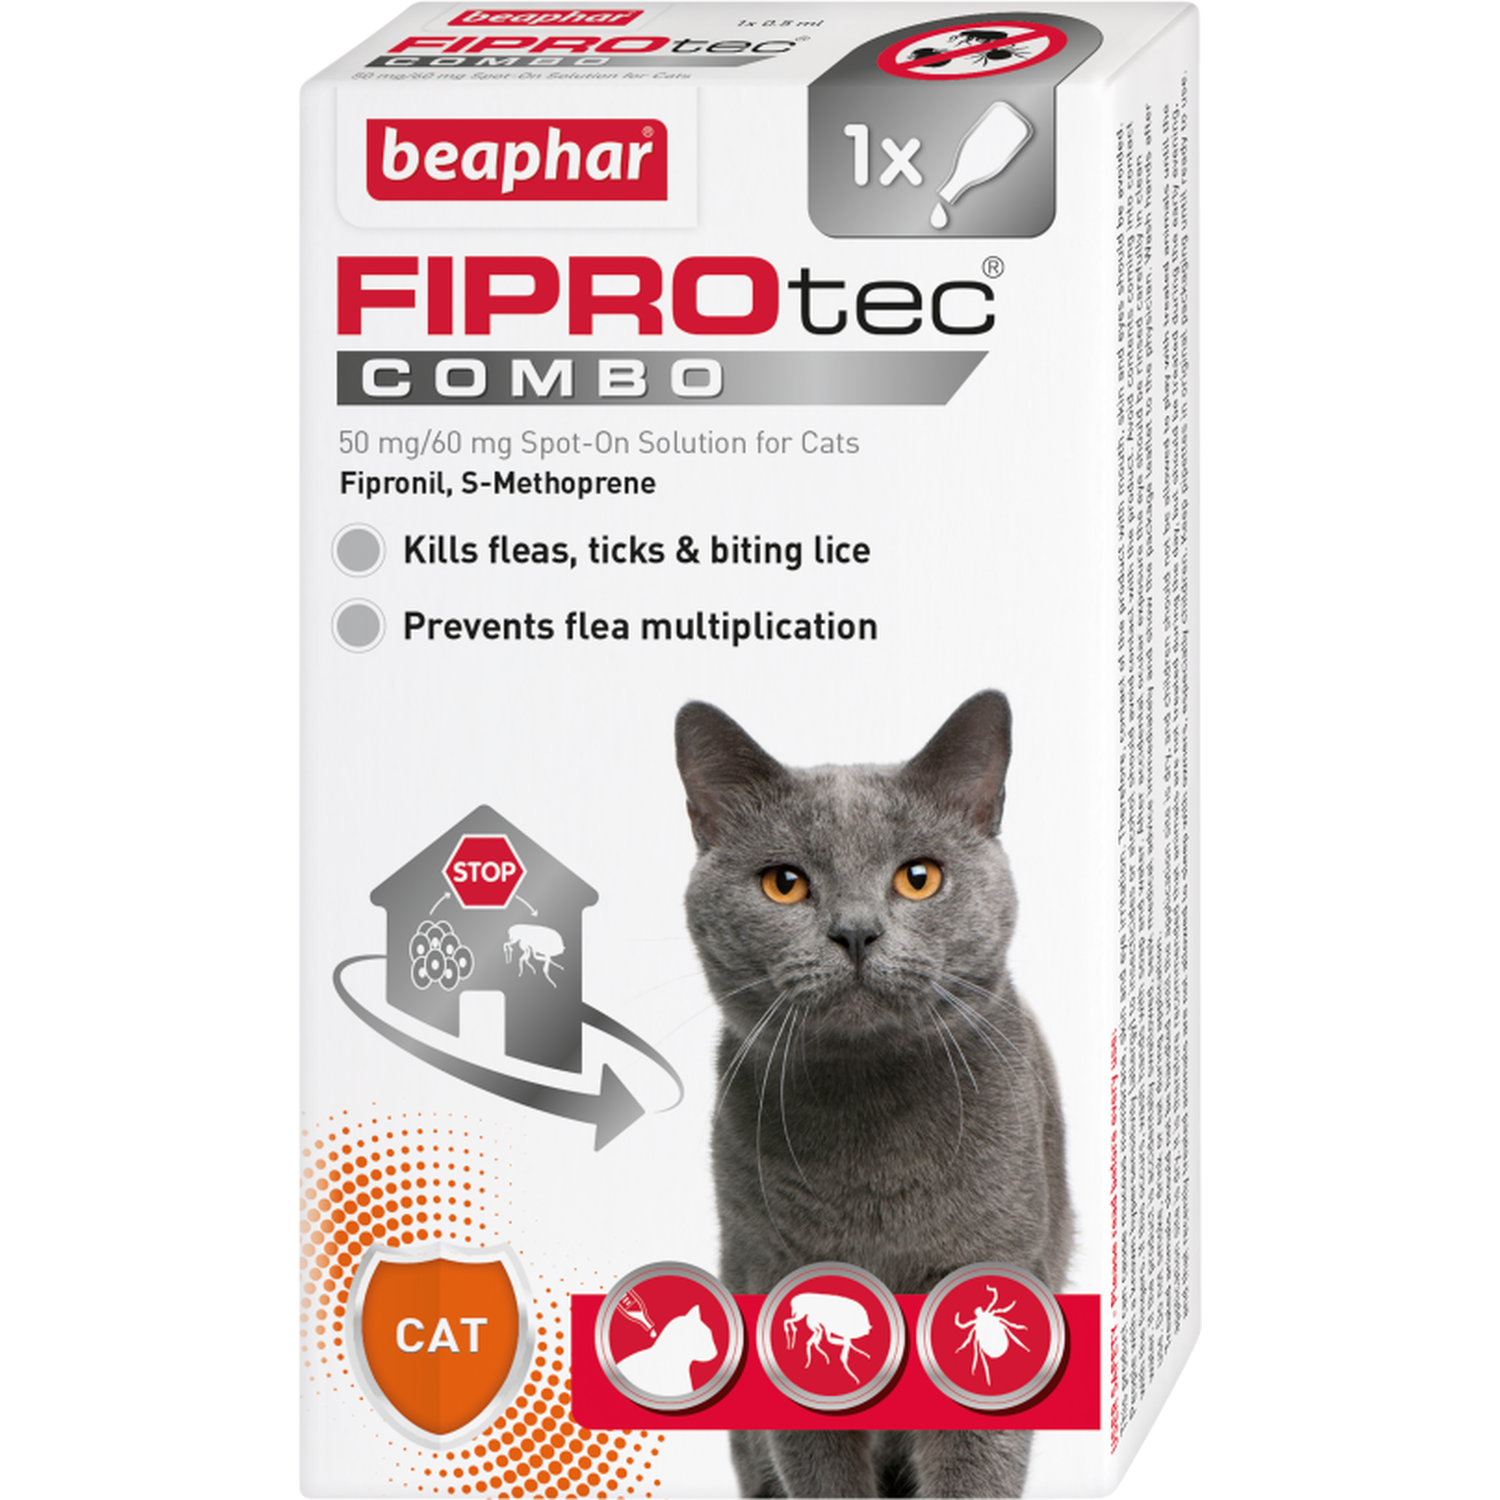 FIPROtec Combo Spot On For Cats Image